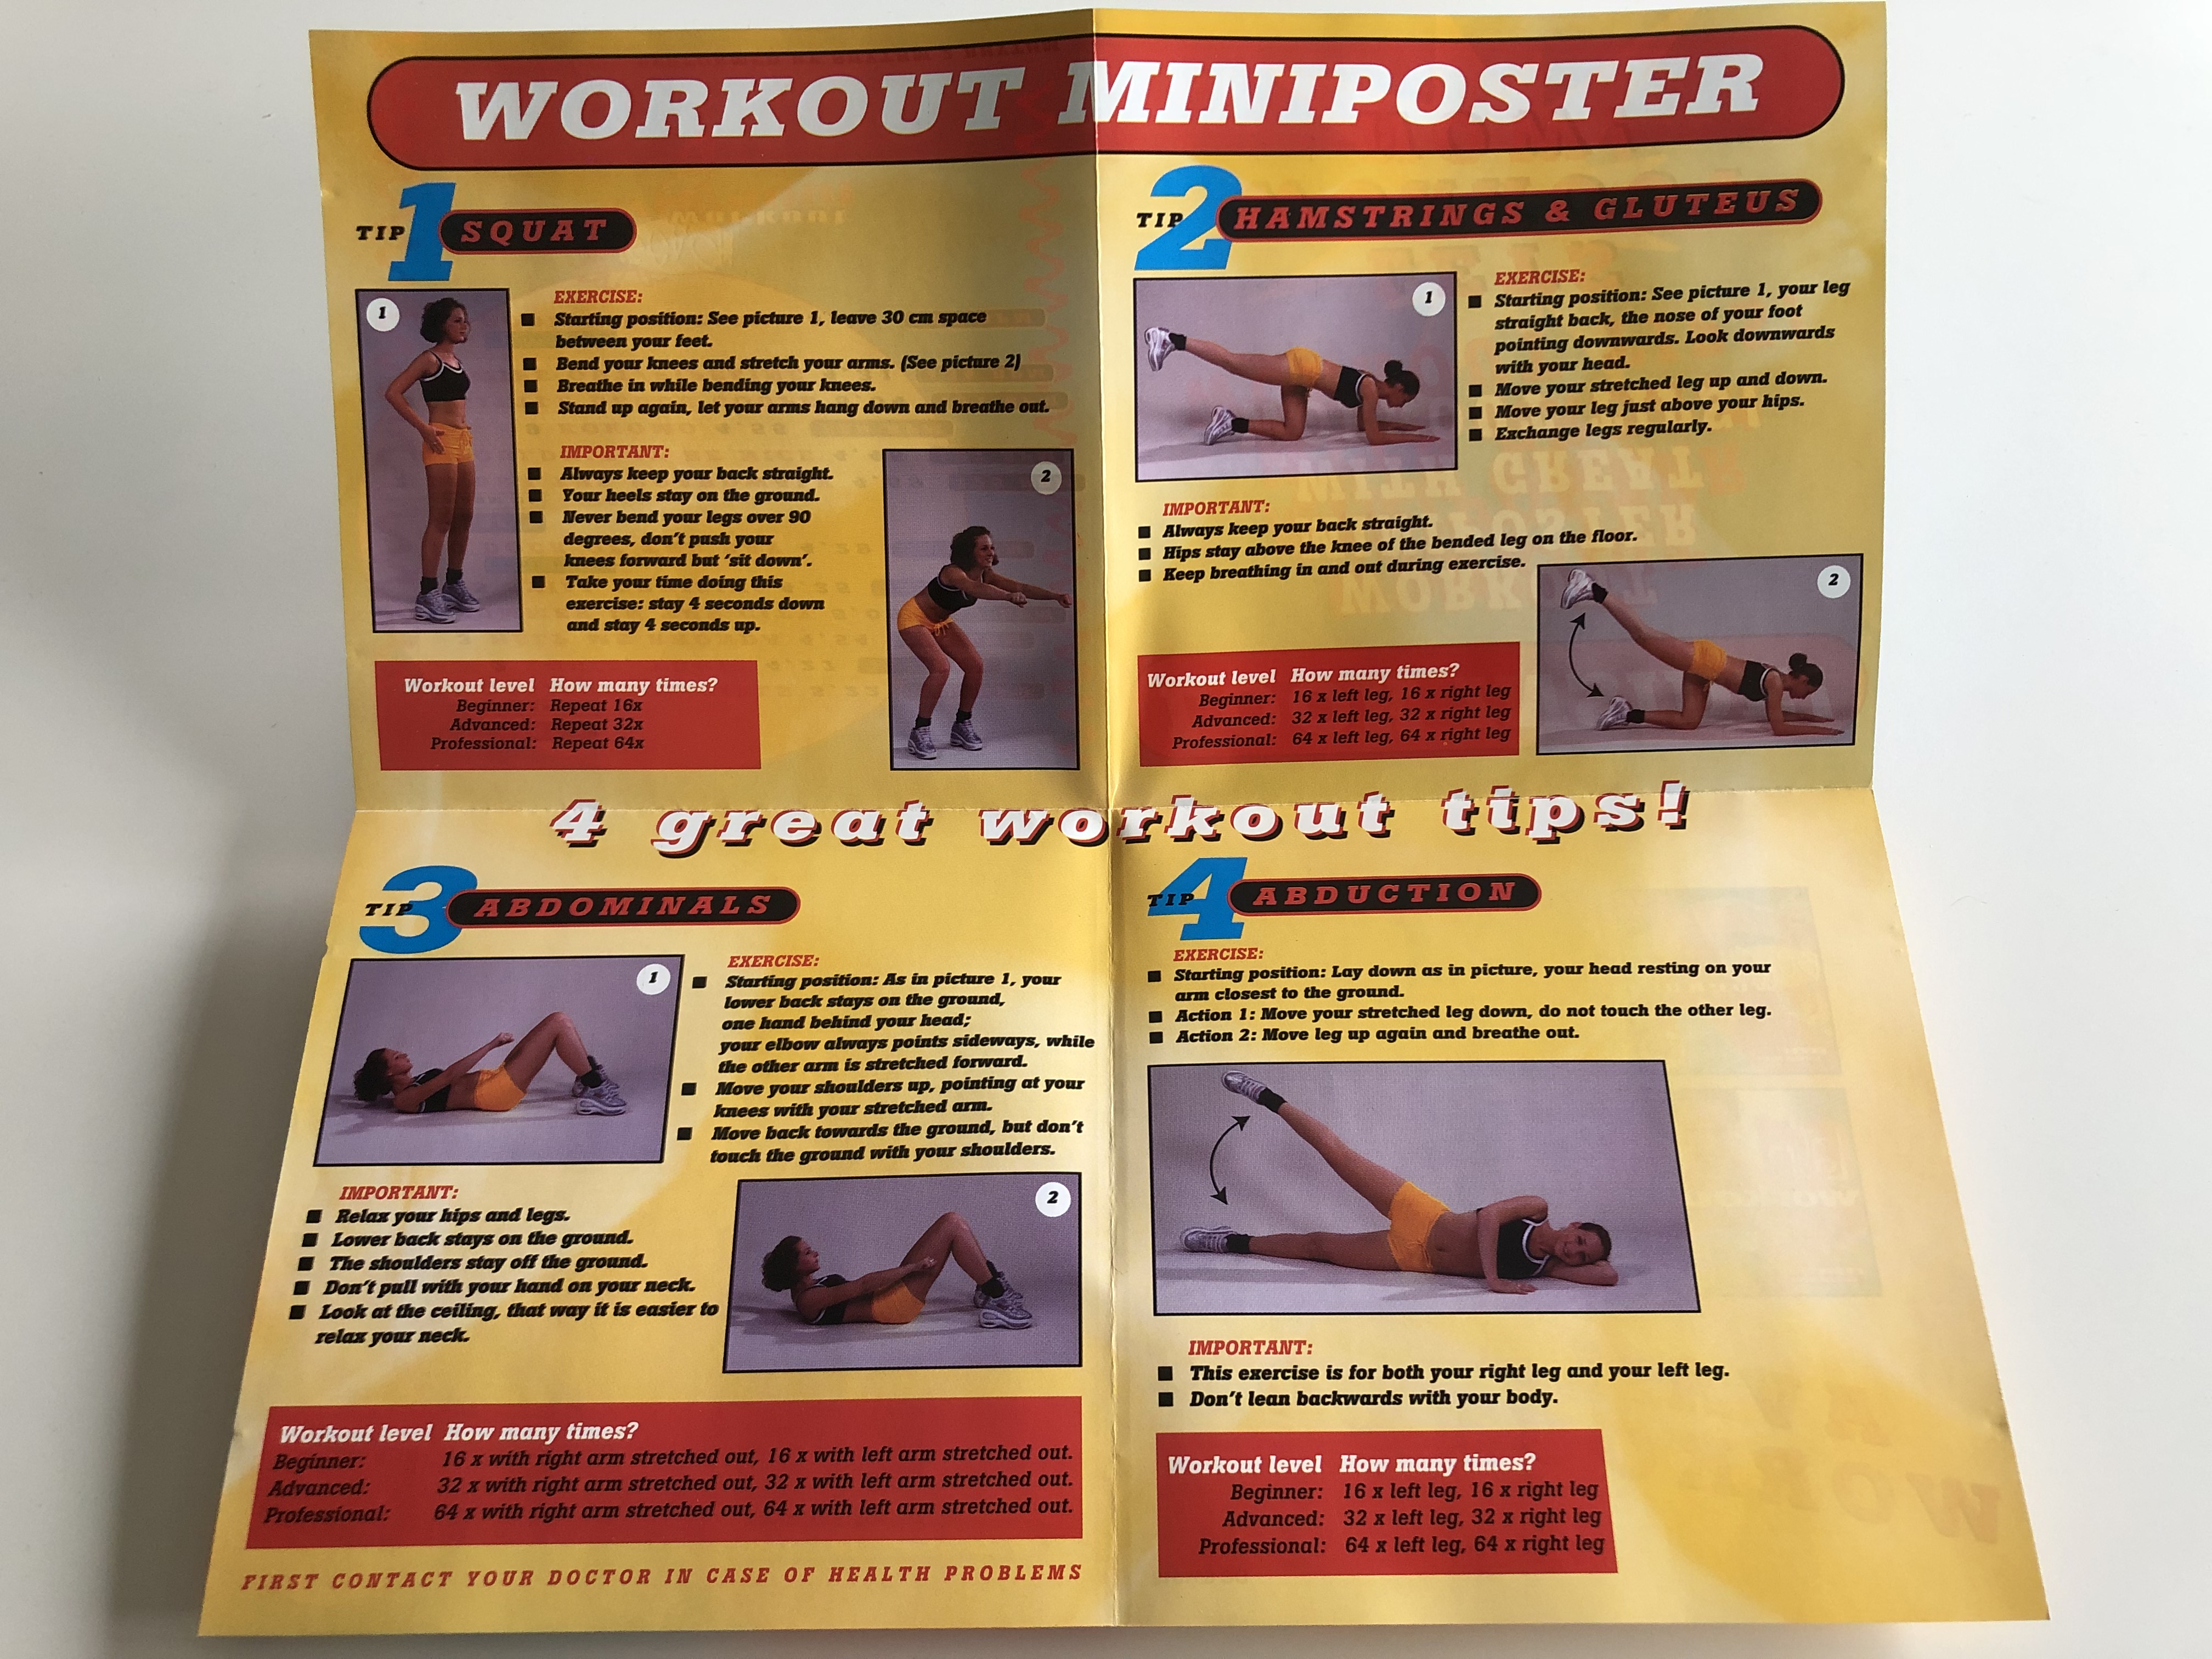 beach-workout-real-workout-music-performed-by-rhythm-2-rhythm-including-free-workout-tips-with-workout-miniposter-audio-cd-1998-disky-dc-851312-2-.jpg